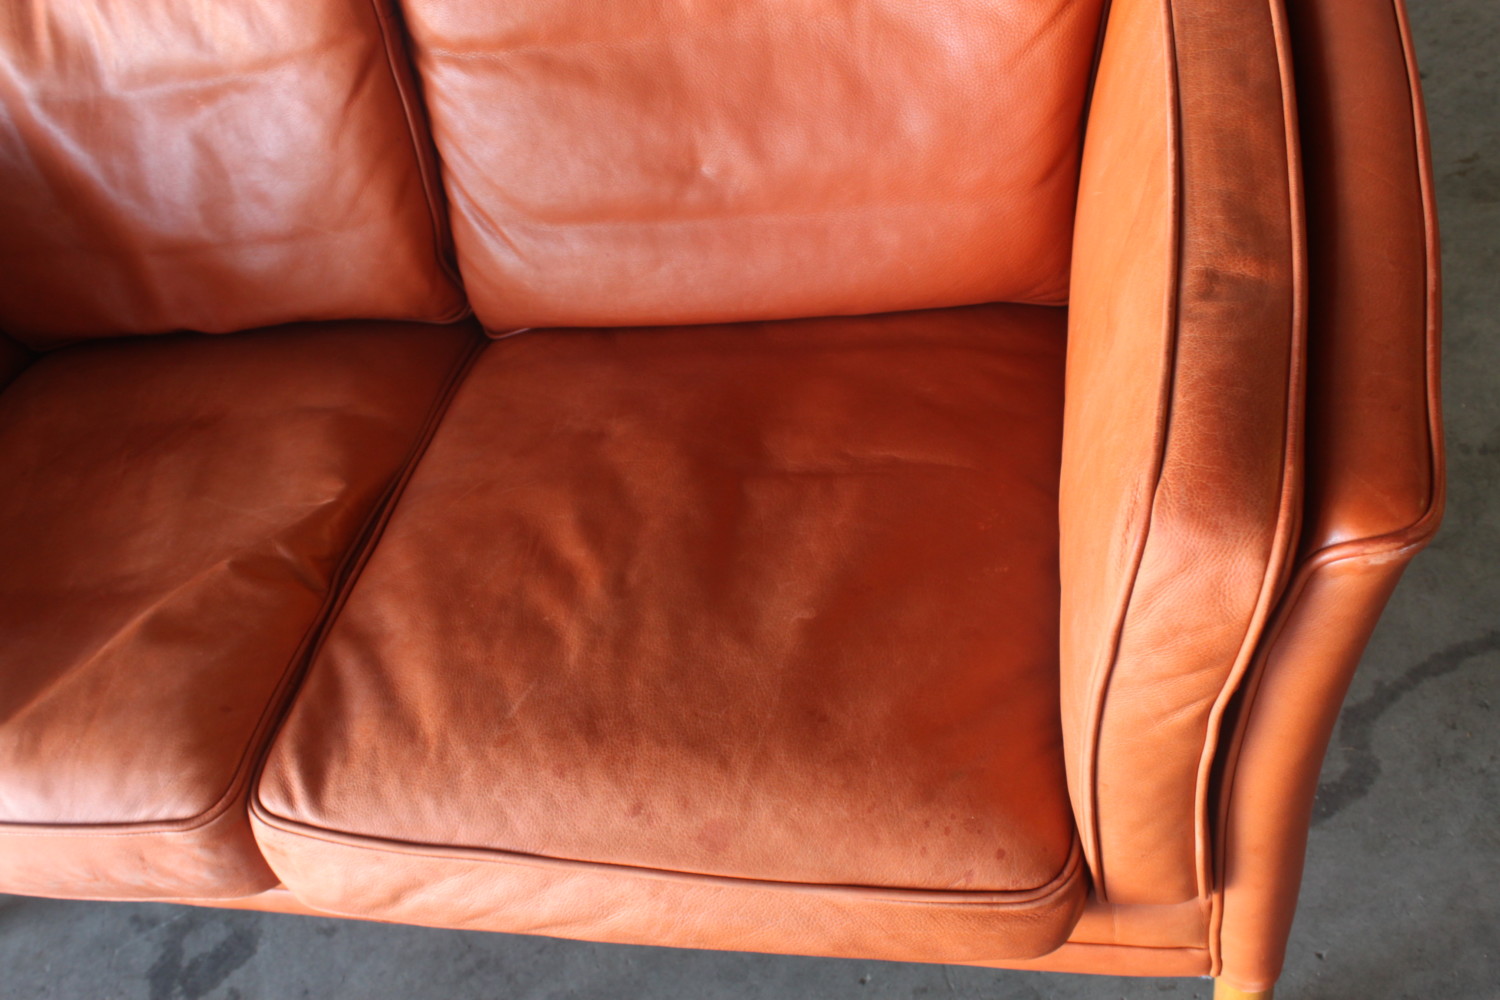 Danish Leather Two Seater